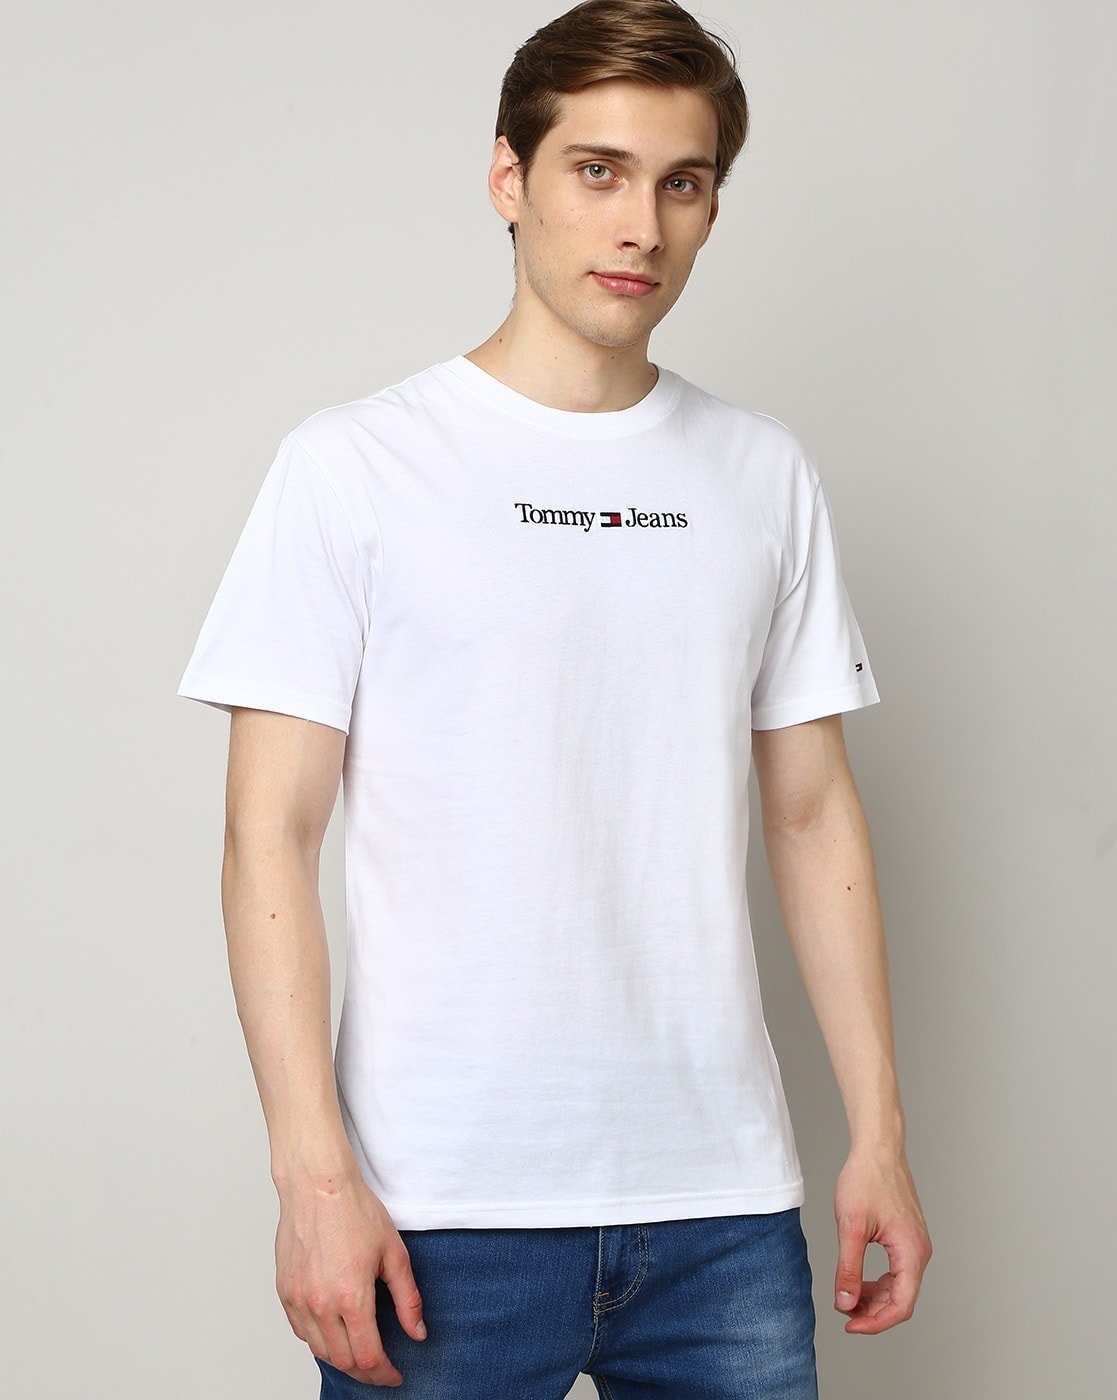 TOMMY HILFIGER Regular Fit Brand Embroidered Crew-Neck T-Shirt For Men (White, S)